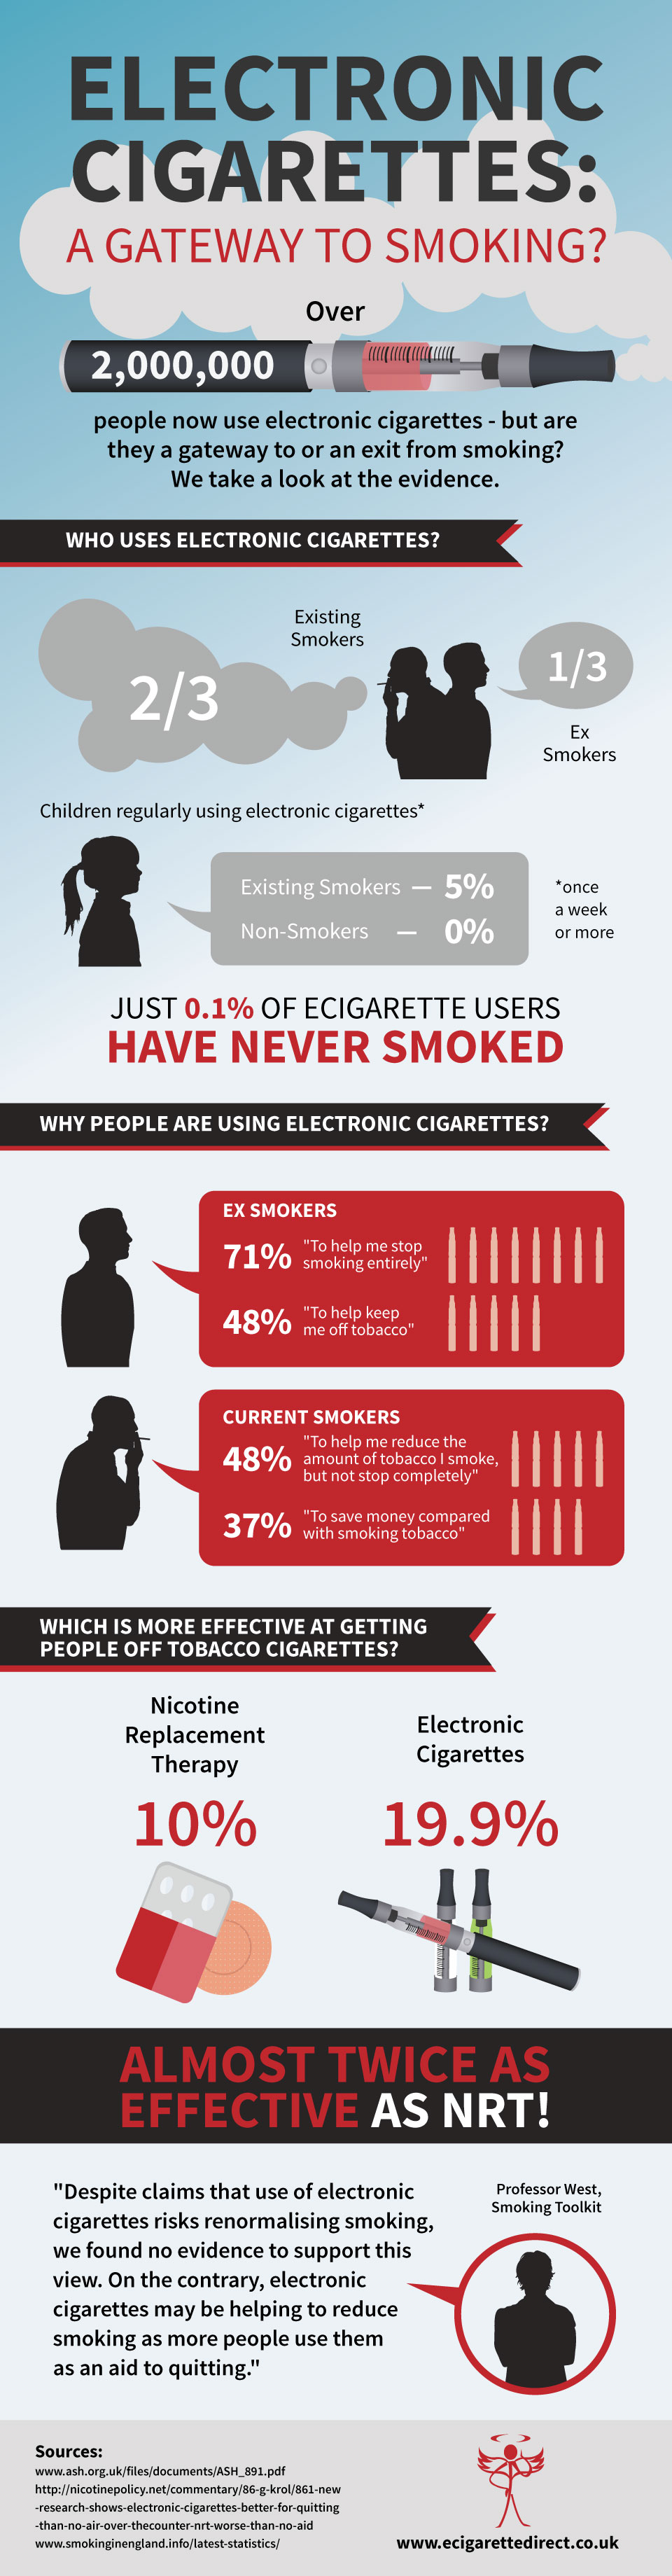 Are Electronic Cigarettes a Gateway to Smoking?